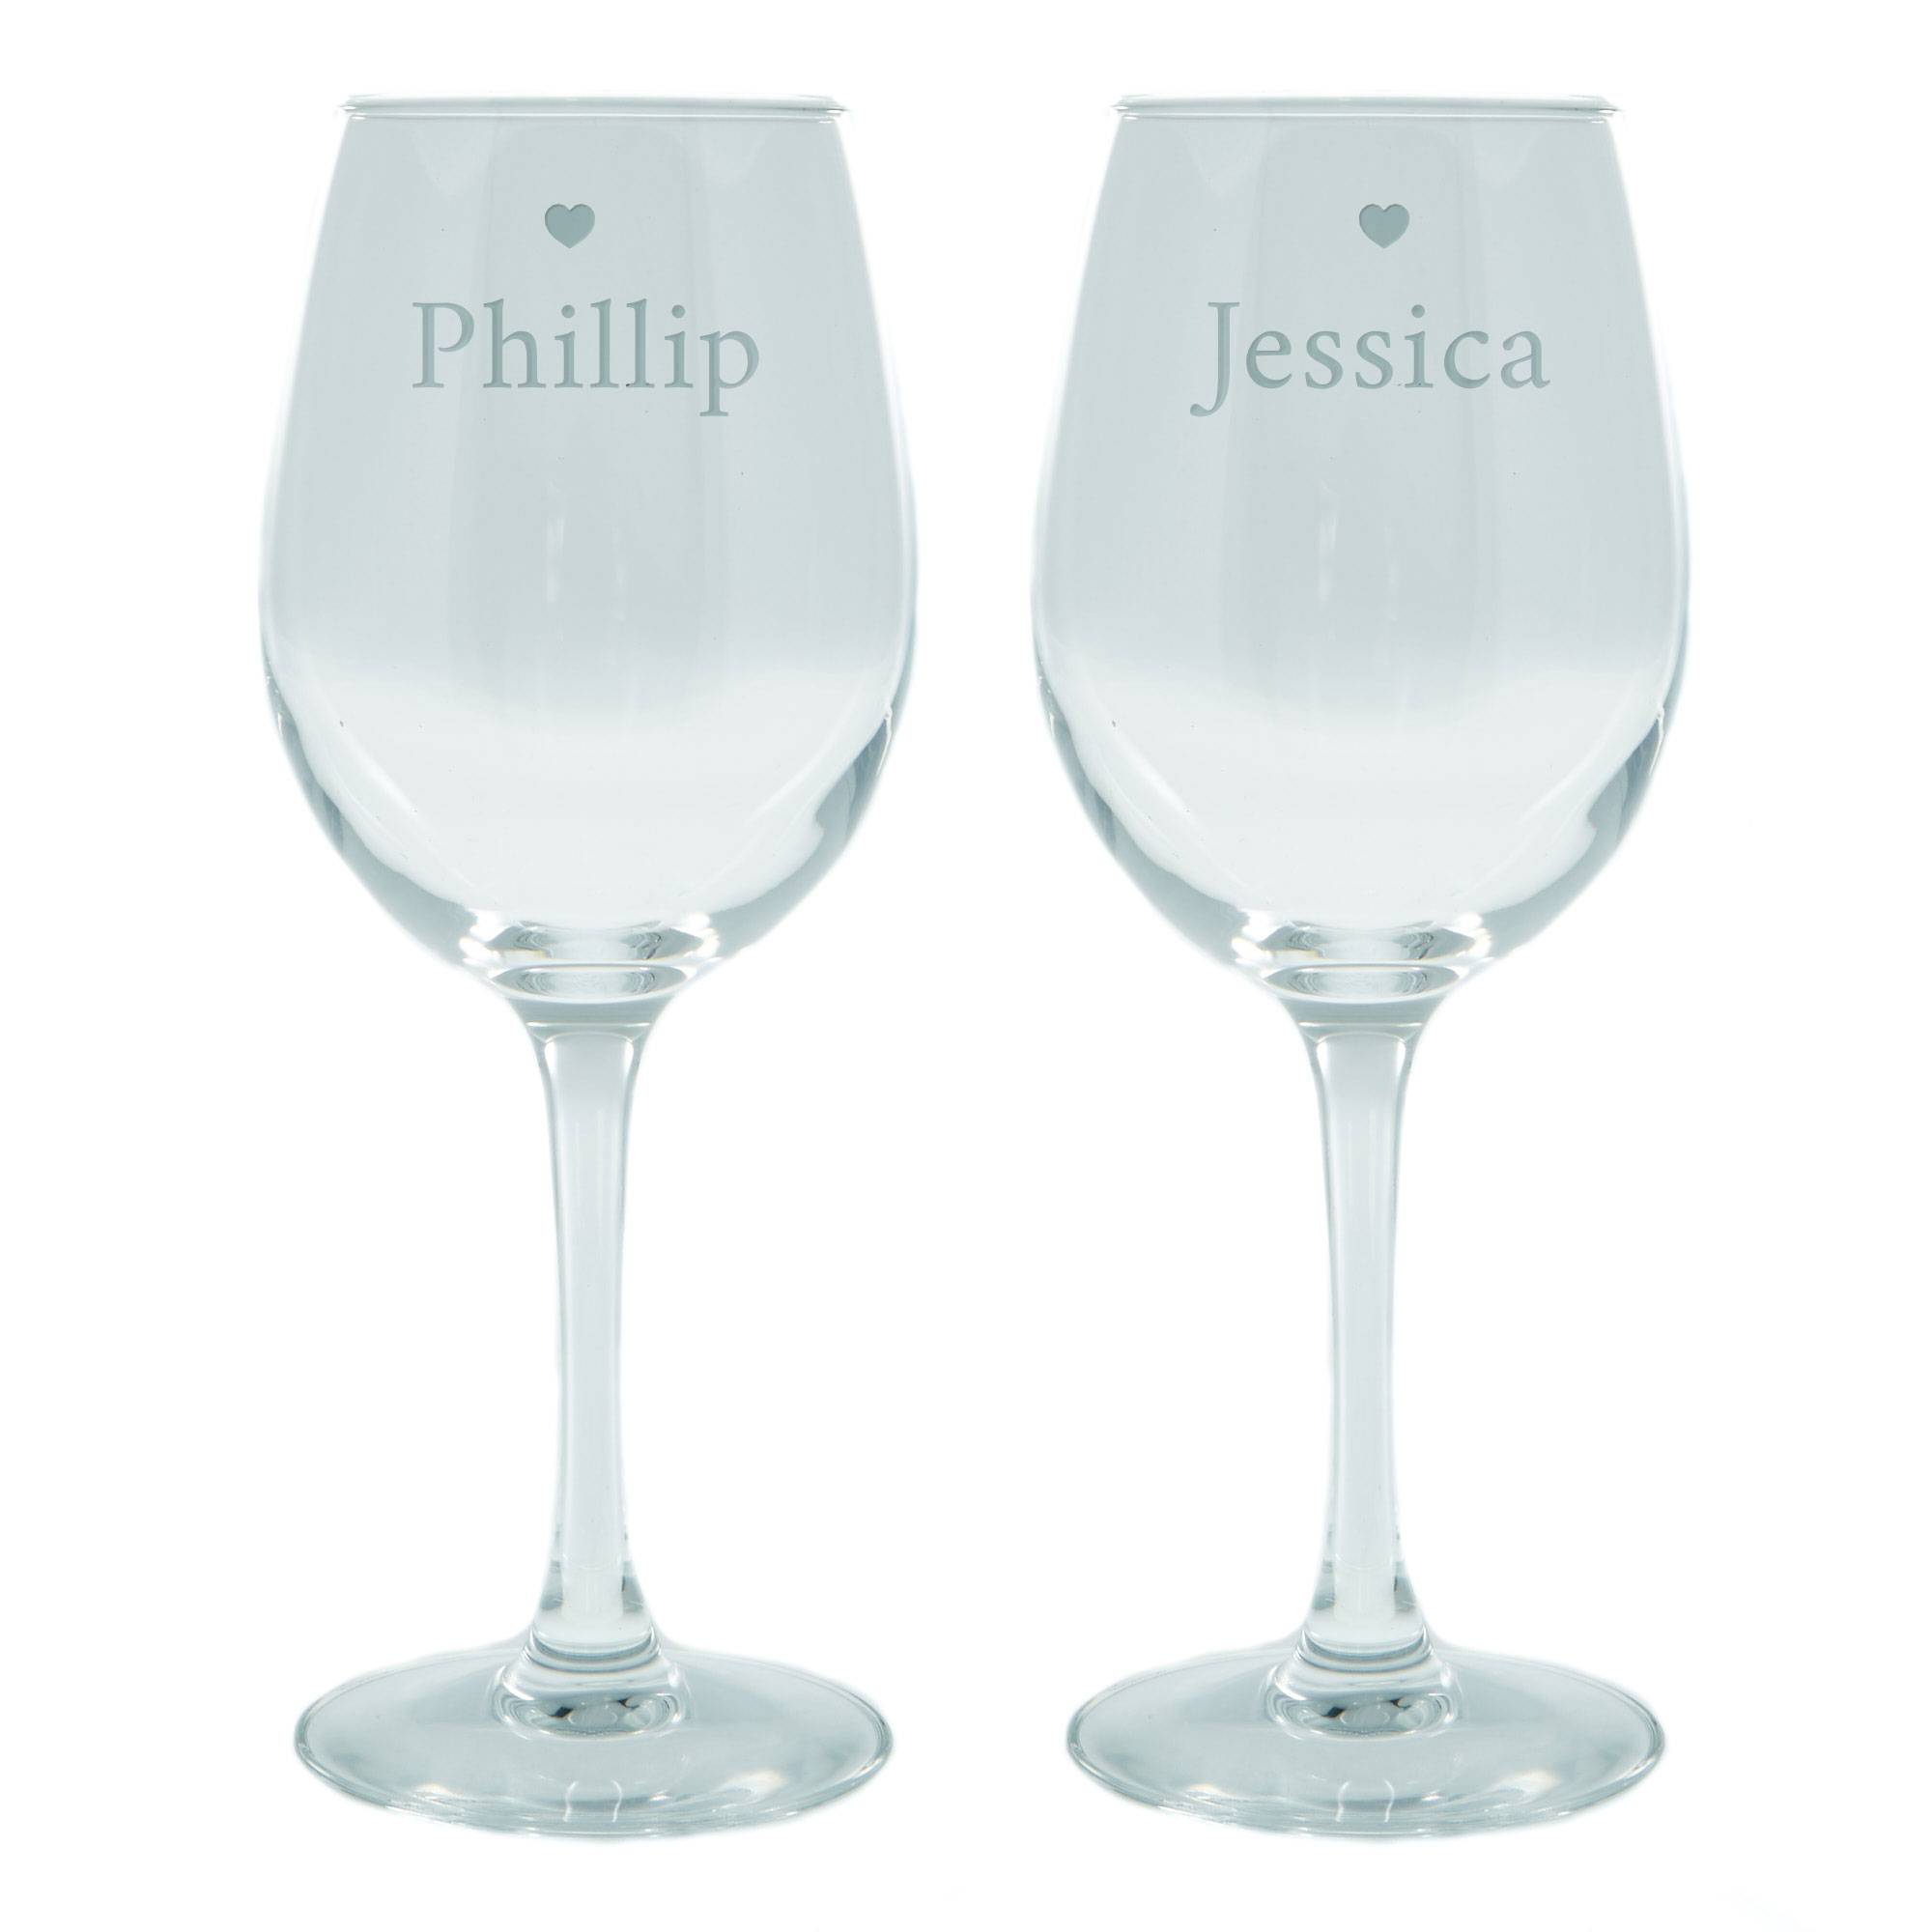 Personalised Engraved Wine Glasses|Glassware Set - His and Hers Hearts